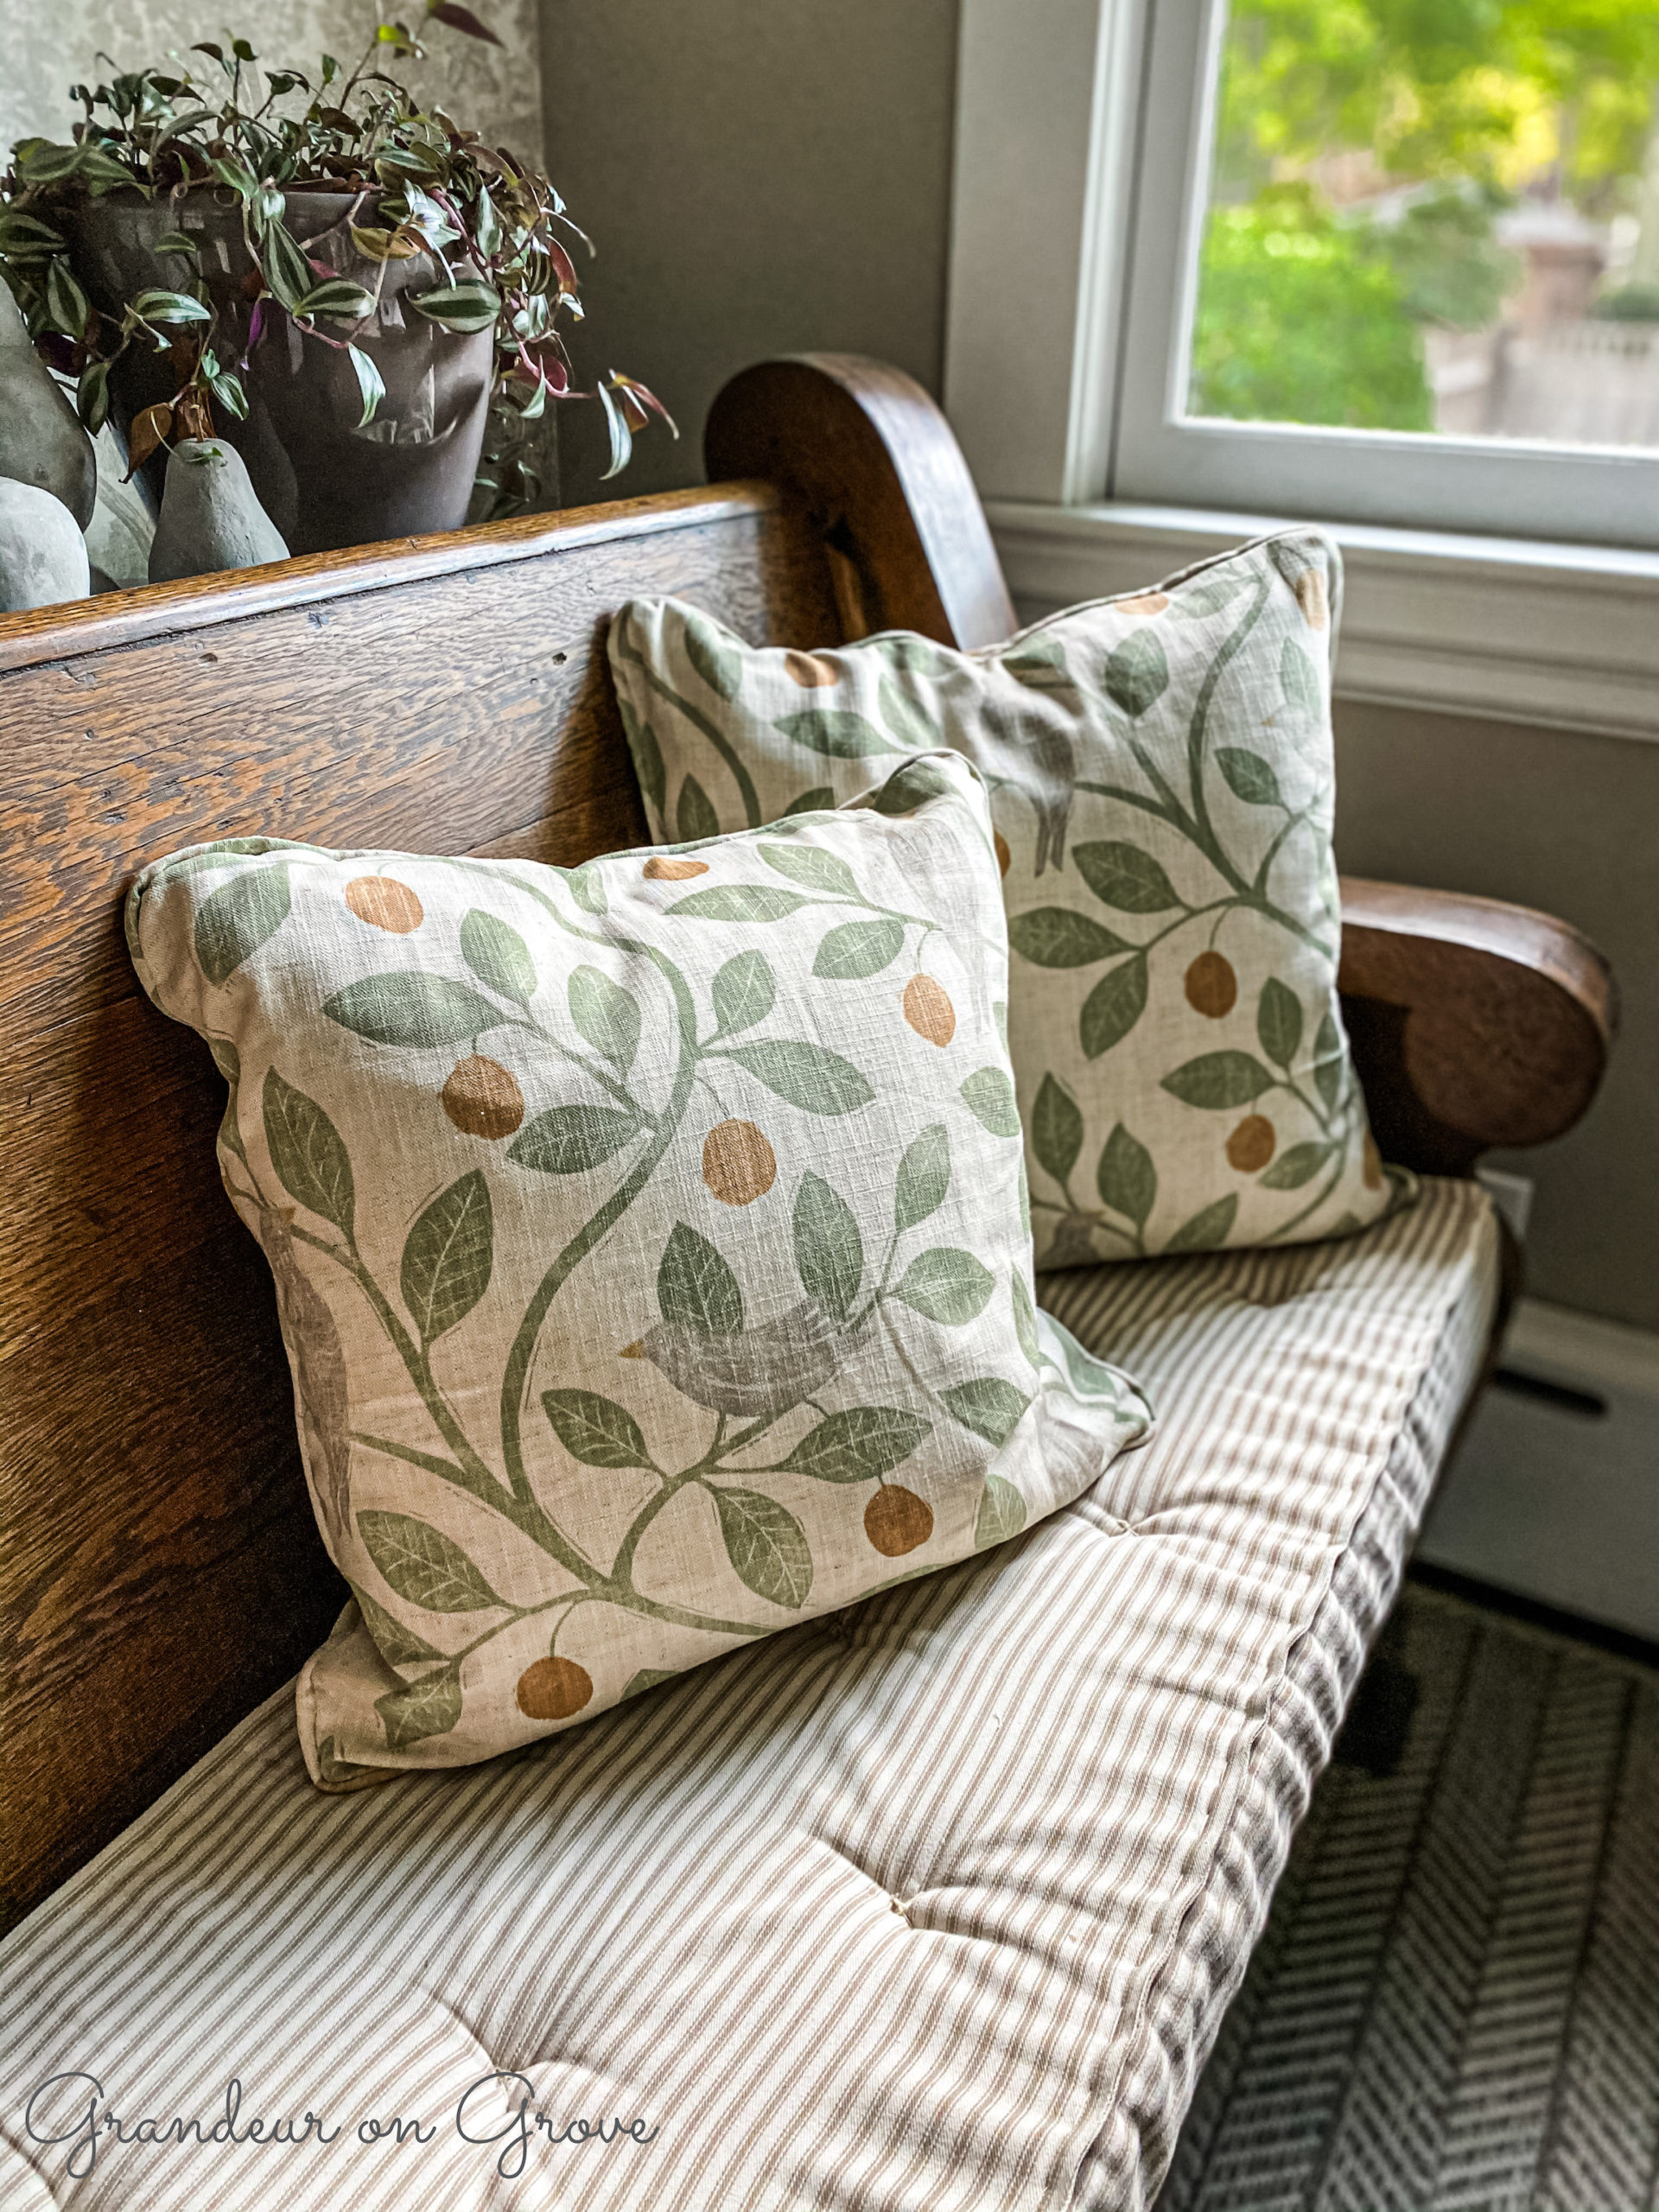 Two pillows made of leaf and bird fabric